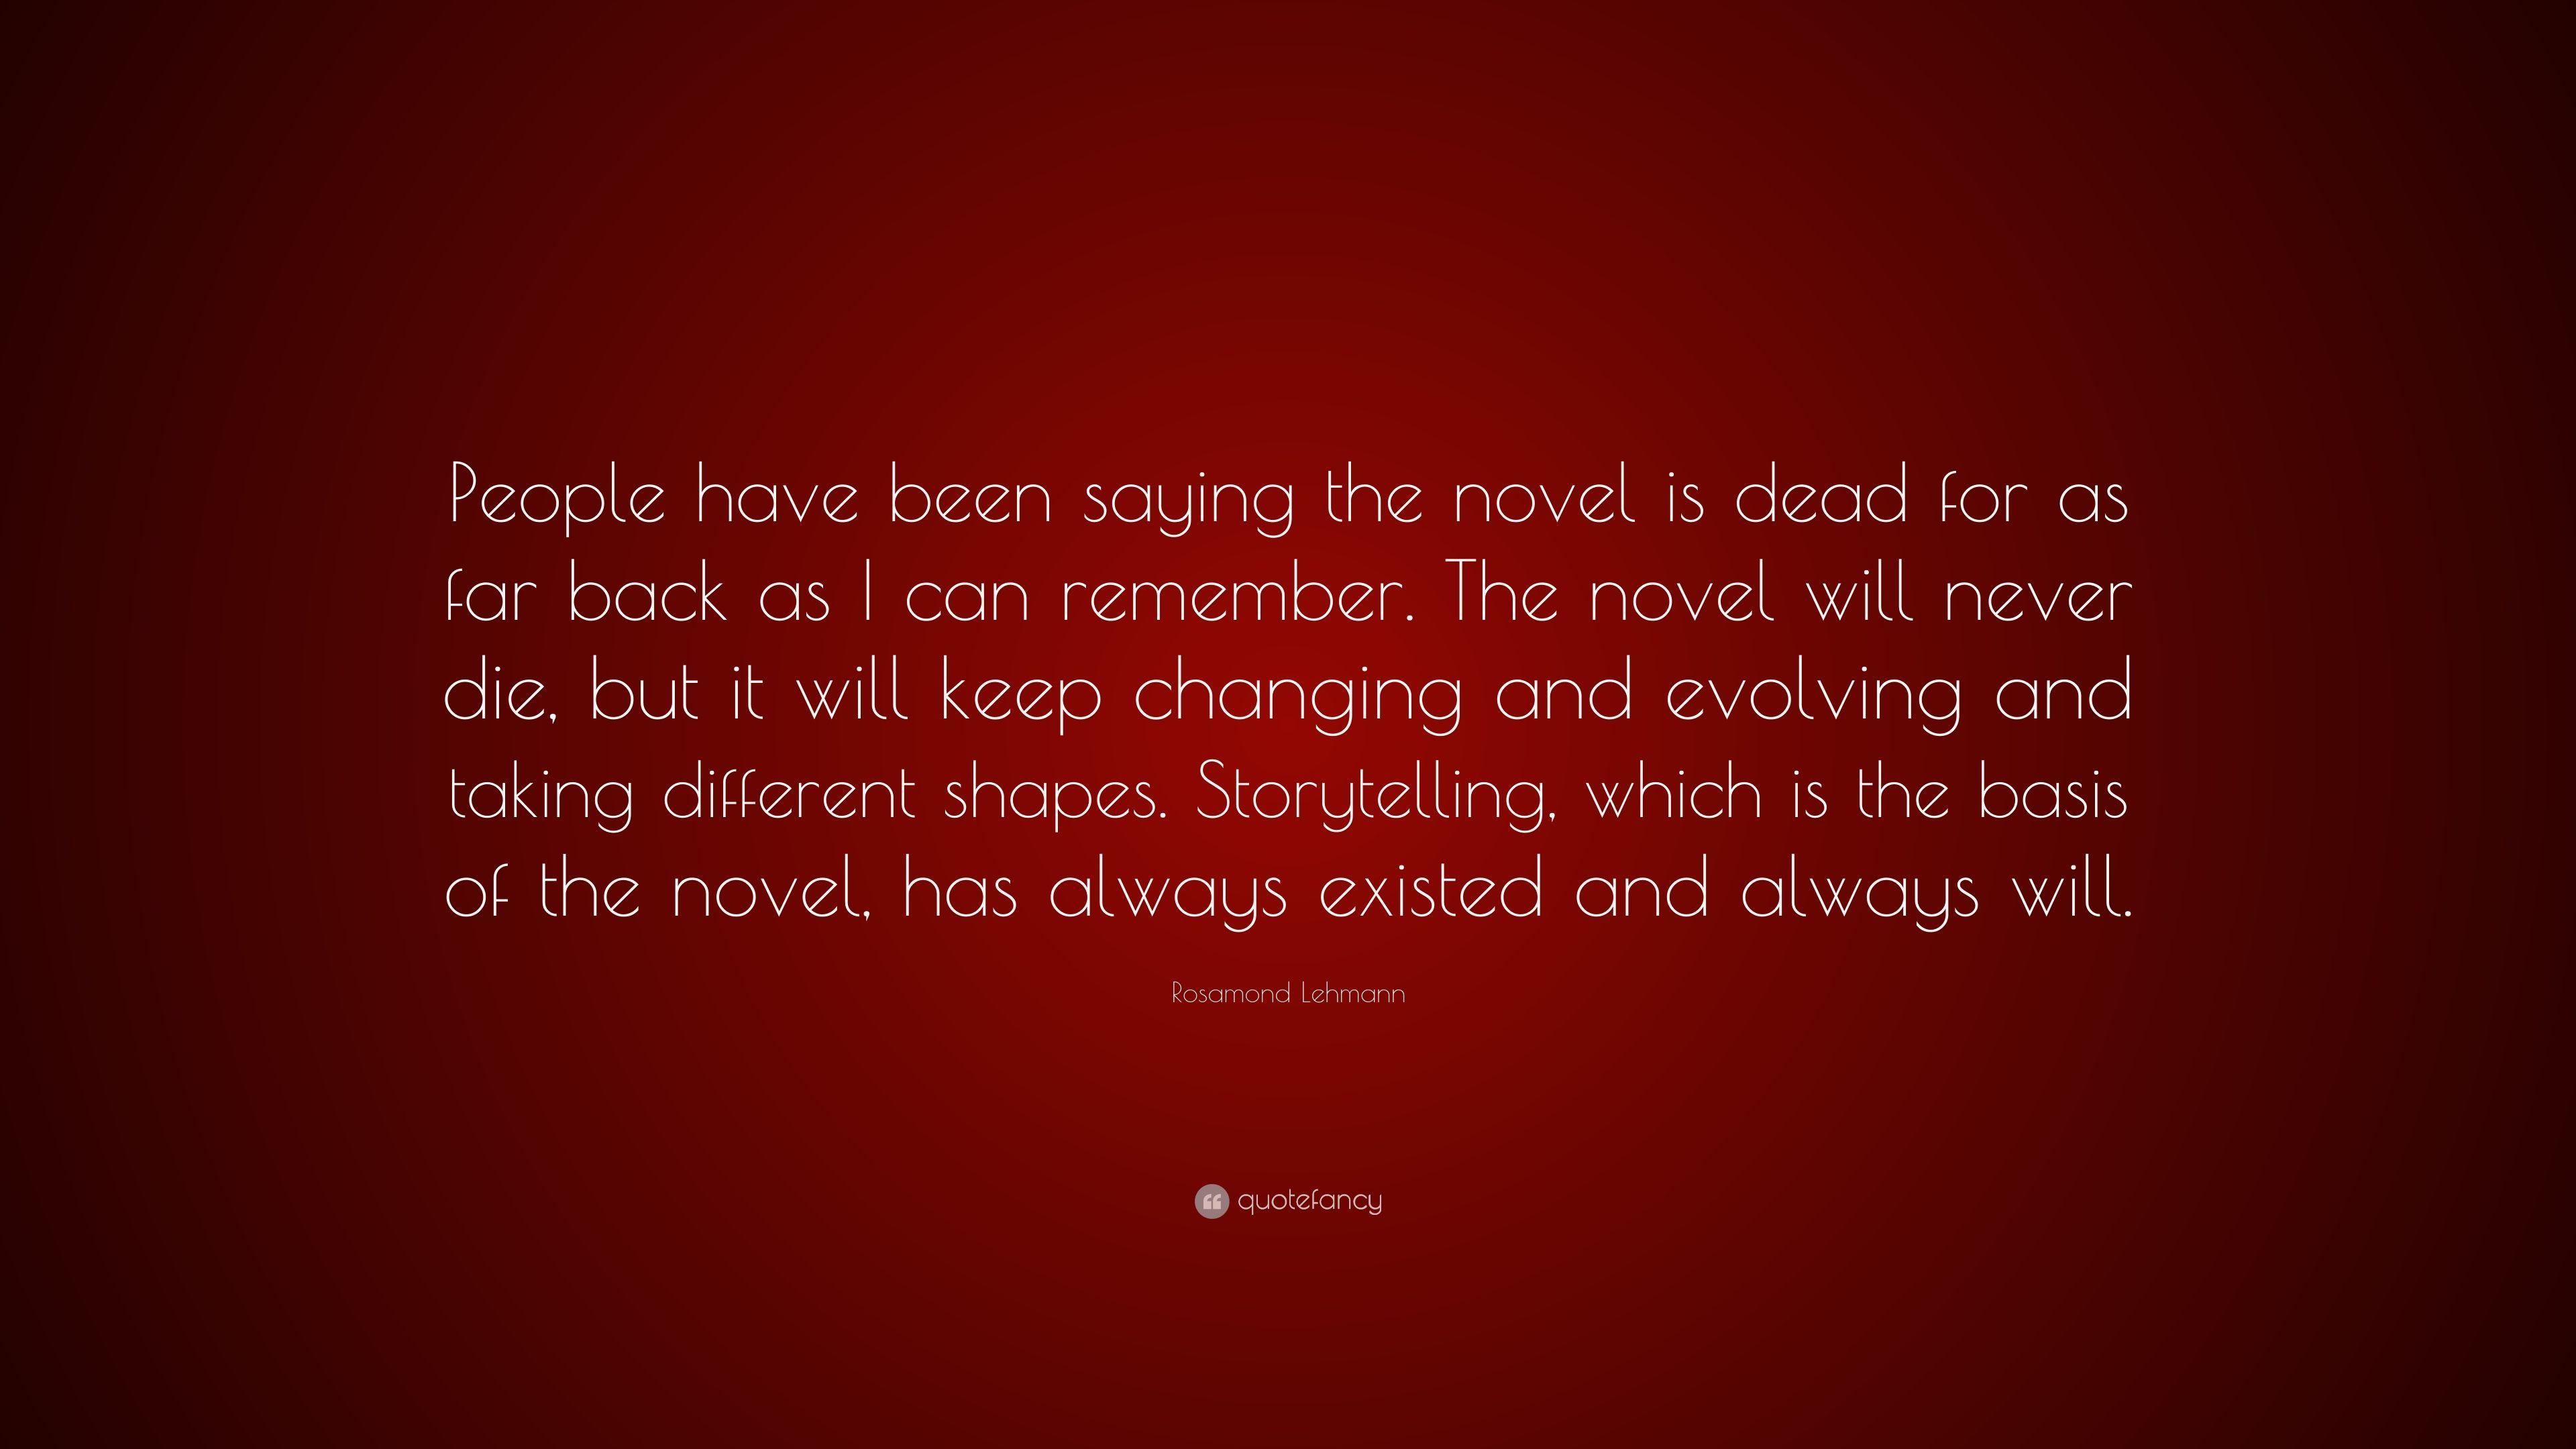 Rosamond Lehmann Quote: “People have been saying the novel is dead